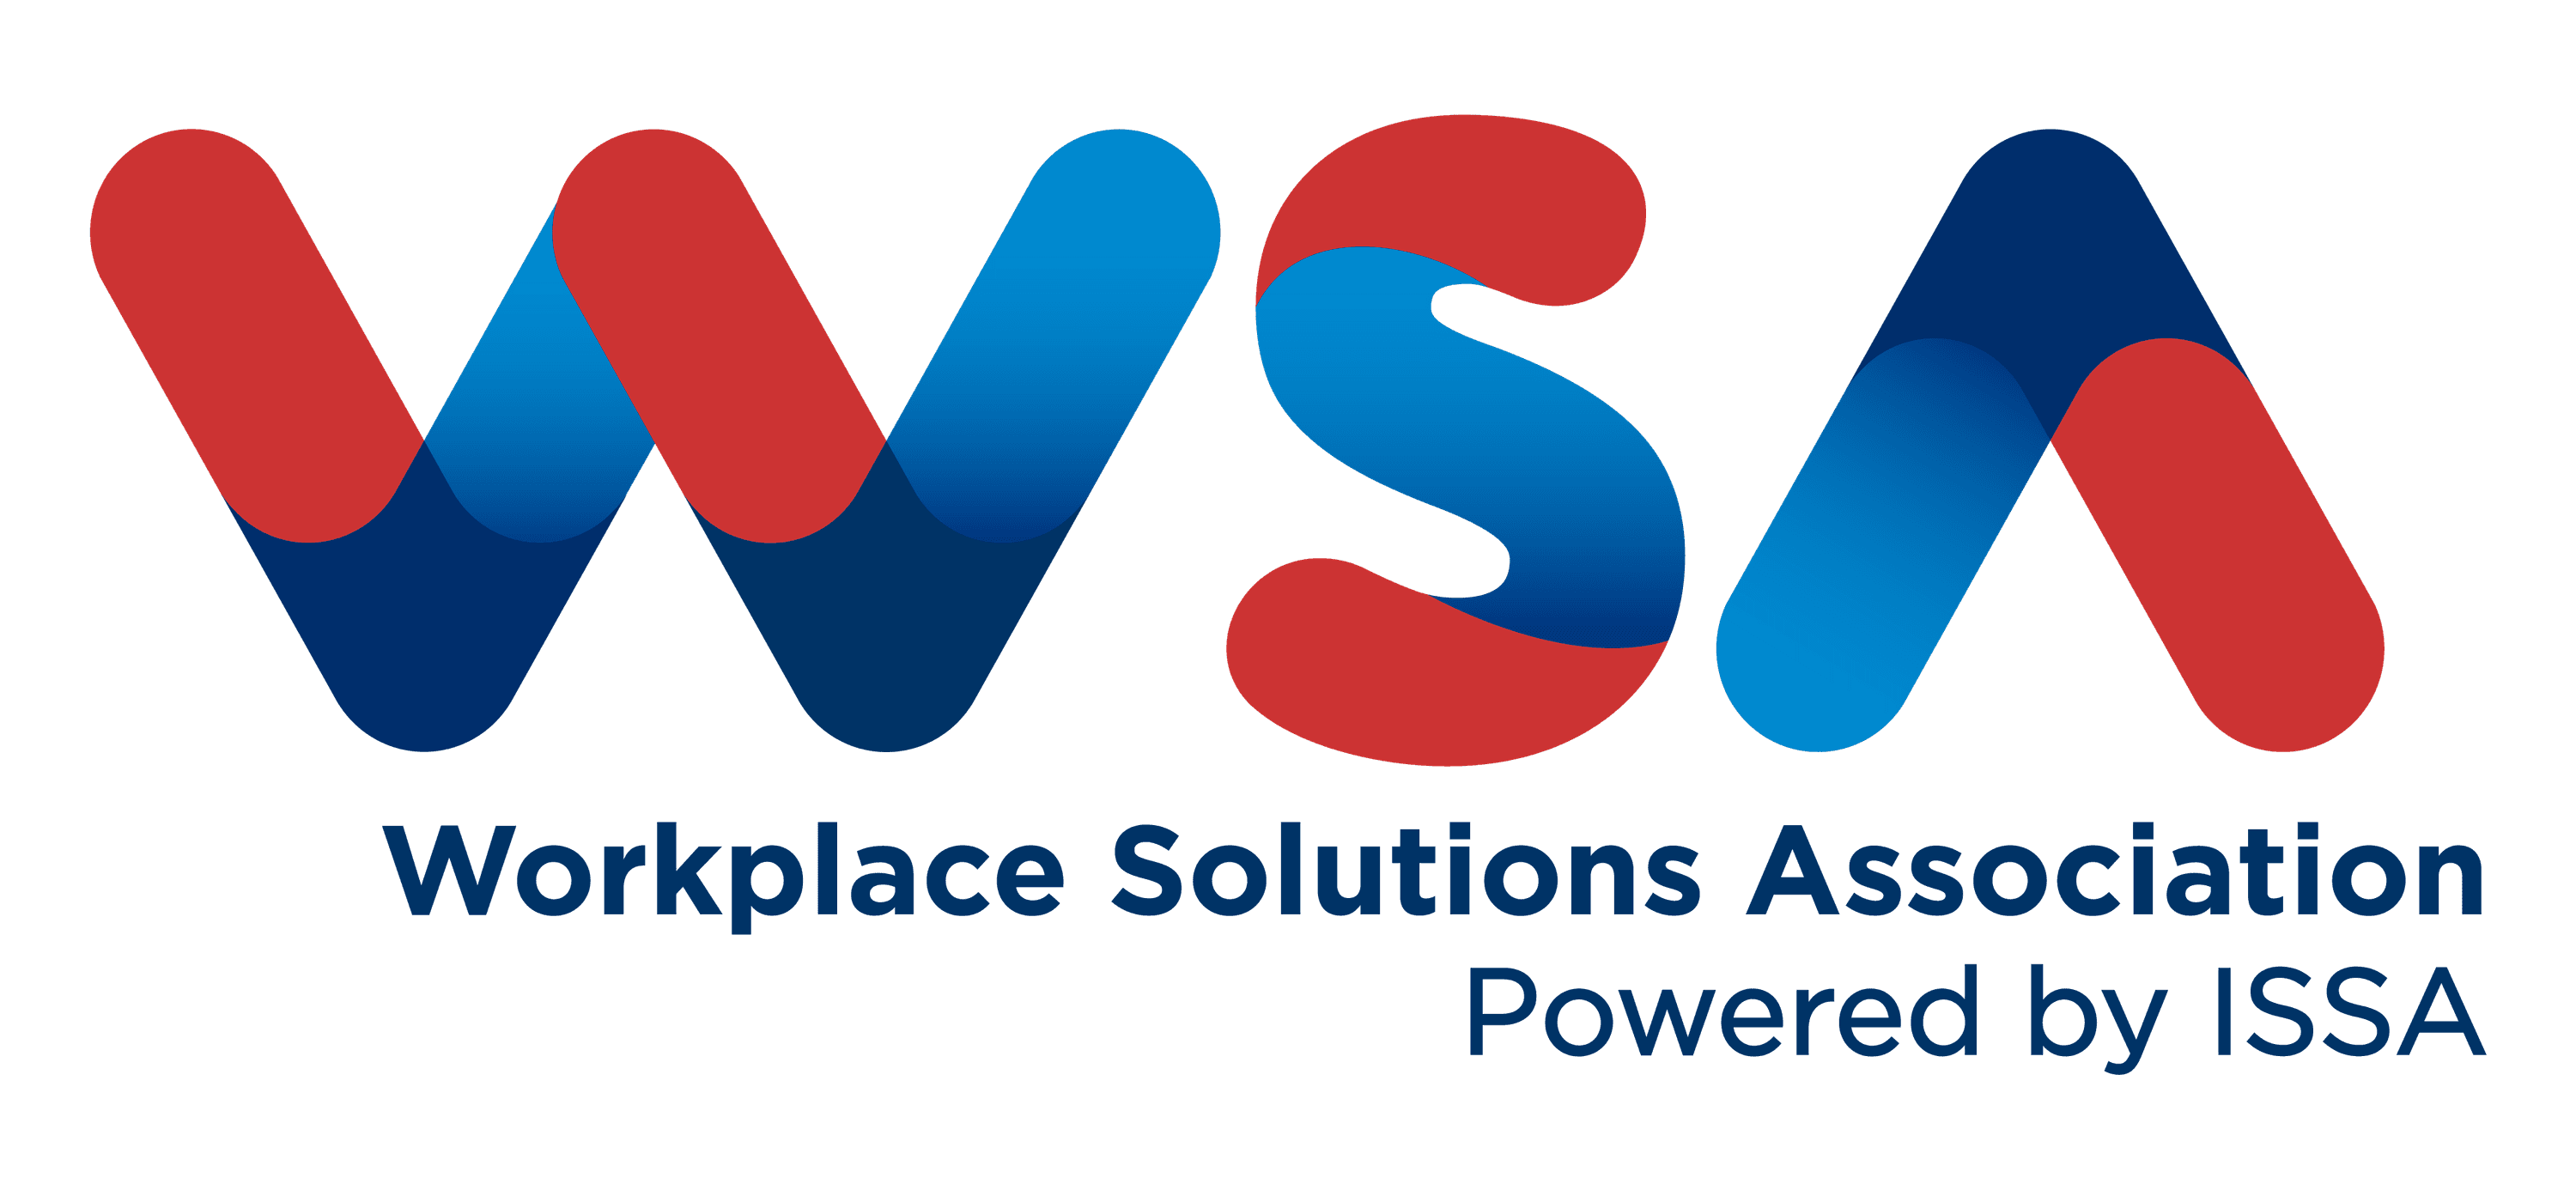 WSA - Workplace Solutions Association Powered by ISSA